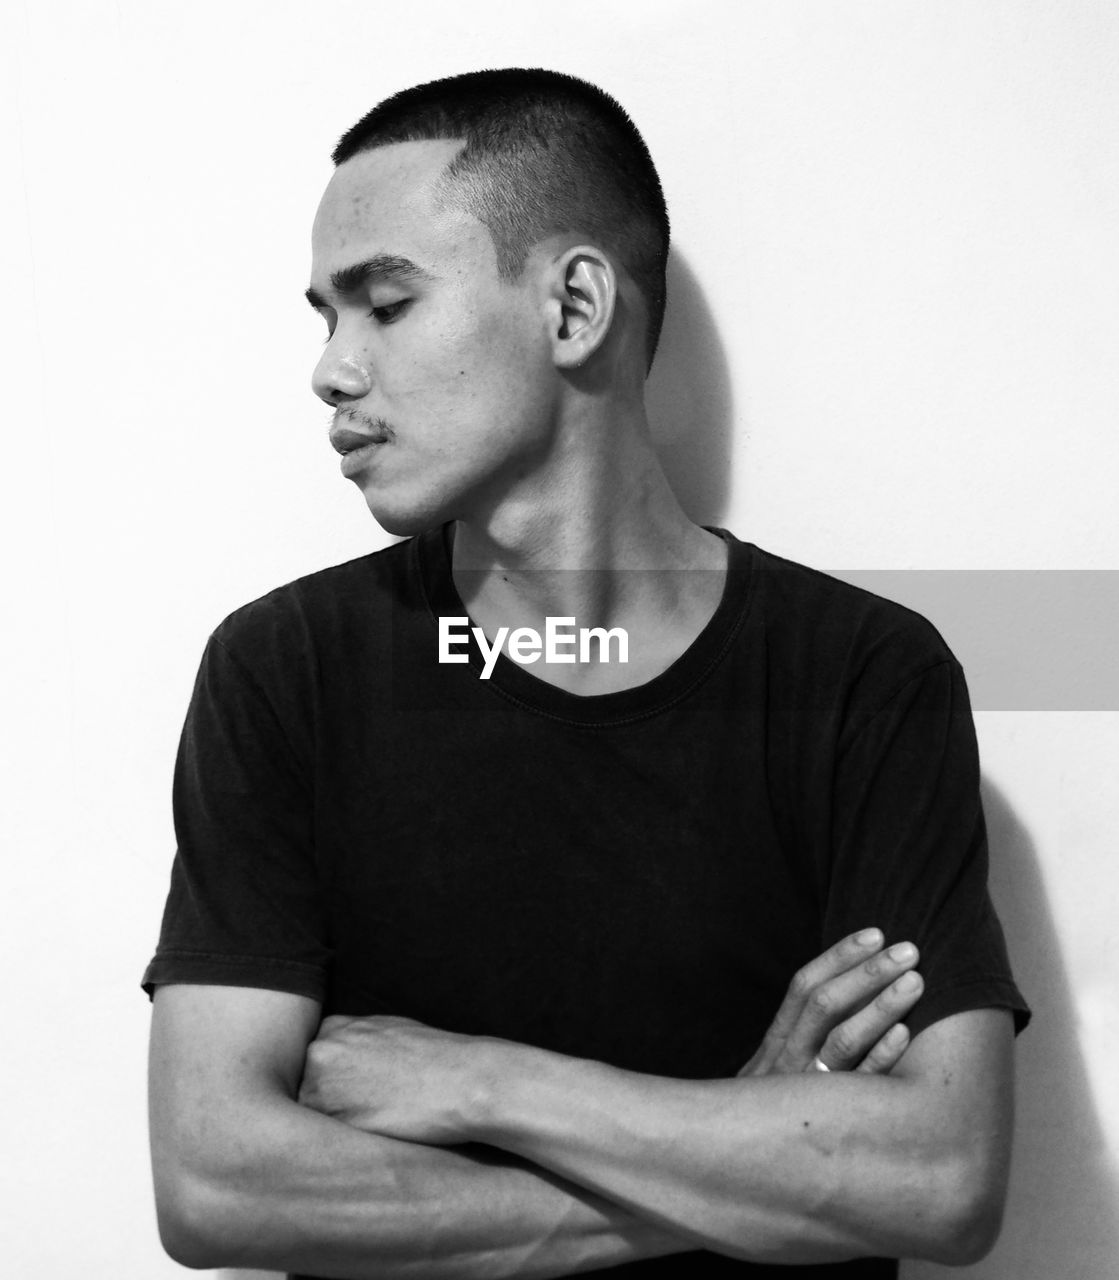 black, one person, black and white, studio shot, waist up, indoors, adult, monochrome photography, arms crossed, white, portrait, monochrome, casual clothing, men, t-shirt, arm, person, young adult, shaved head, sitting, looking, lifestyles, white background, front view, hand, looking away, contemplation, clothing, emotion, hairstyle, standing